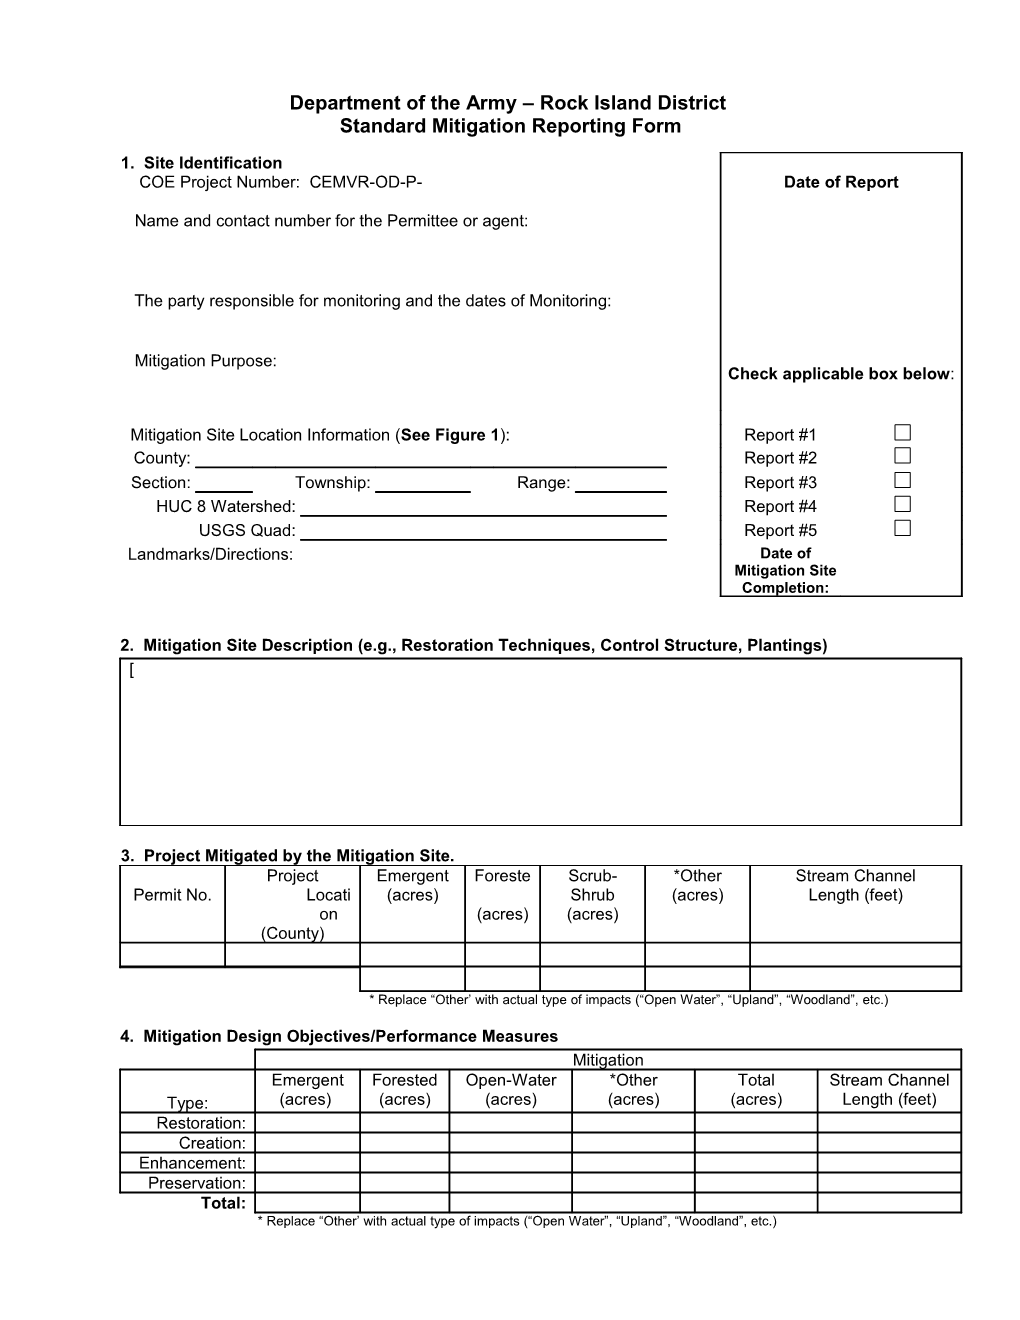 Standard Mitigation Reporting Form Rock Island District Page 1